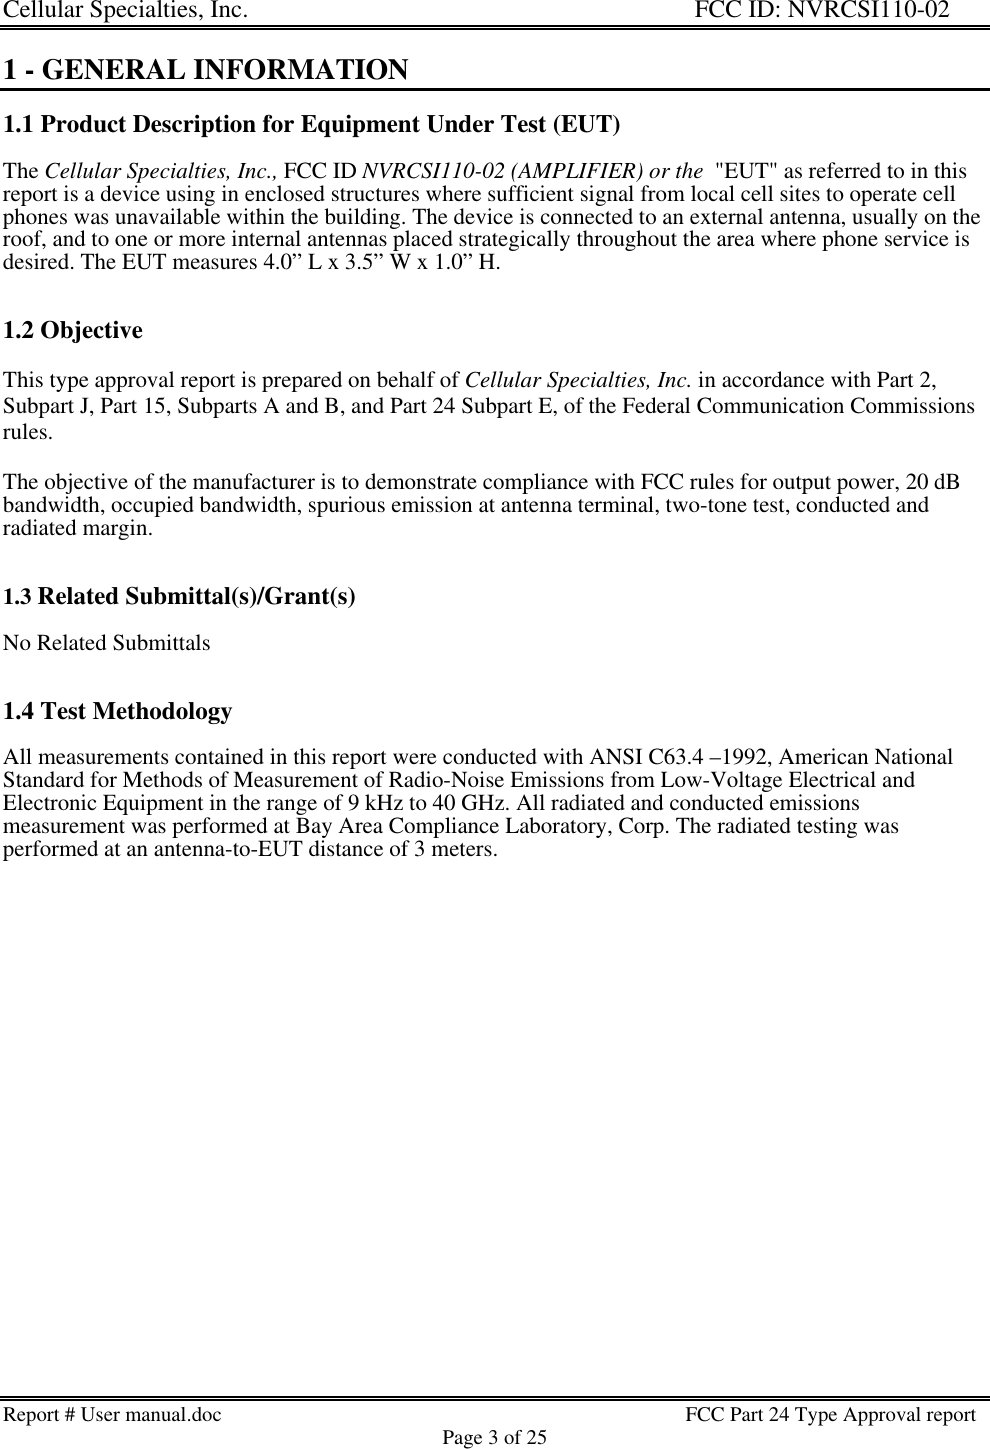 Cellular Specialties, Inc. FCC ID: NVRCSI110-02Report # User manual.doc                                                                                         FCC Part 24 Type Approval reportPage 3 of 251 - GENERAL INFORMATION1.1 Product Description for Equipment Under Test (EUT)The Cellular Specialties, Inc., FCC ID NVRCSI110-02 (AMPLIFIER) or the  &quot;EUT&quot; as referred to in thisreport is a device using in enclosed structures where sufficient signal from local cell sites to operate cellphones was unavailable within the building. The device is connected to an external antenna, usually on theroof, and to one or more internal antennas placed strategically throughout the area where phone service isdesired. The EUT measures 4.0” L x 3.5” W x 1.0” H.1.2 ObjectiveThis type approval report is prepared on behalf of Cellular Specialties, Inc. in accordance with Part 2,Subpart J, Part 15, Subparts A and B, and Part 24 Subpart E, of the Federal Communication Commissionsrules.The objective of the manufacturer is to demonstrate compliance with FCC rules for output power, 20 dBbandwidth, occupied bandwidth, spurious emission at antenna terminal, two-tone test, conducted andradiated margin.1.3 Related Submittal(s)/Grant(s)No Related Submittals1.4 Test MethodologyAll measurements contained in this report were conducted with ANSI C63.4 –1992, American NationalStandard for Methods of Measurement of Radio-Noise Emissions from Low-Voltage Electrical andElectronic Equipment in the range of 9 kHz to 40 GHz. All radiated and conducted emissionsmeasurement was performed at Bay Area Compliance Laboratory, Corp. The radiated testing wasperformed at an antenna-to-EUT distance of 3 meters.